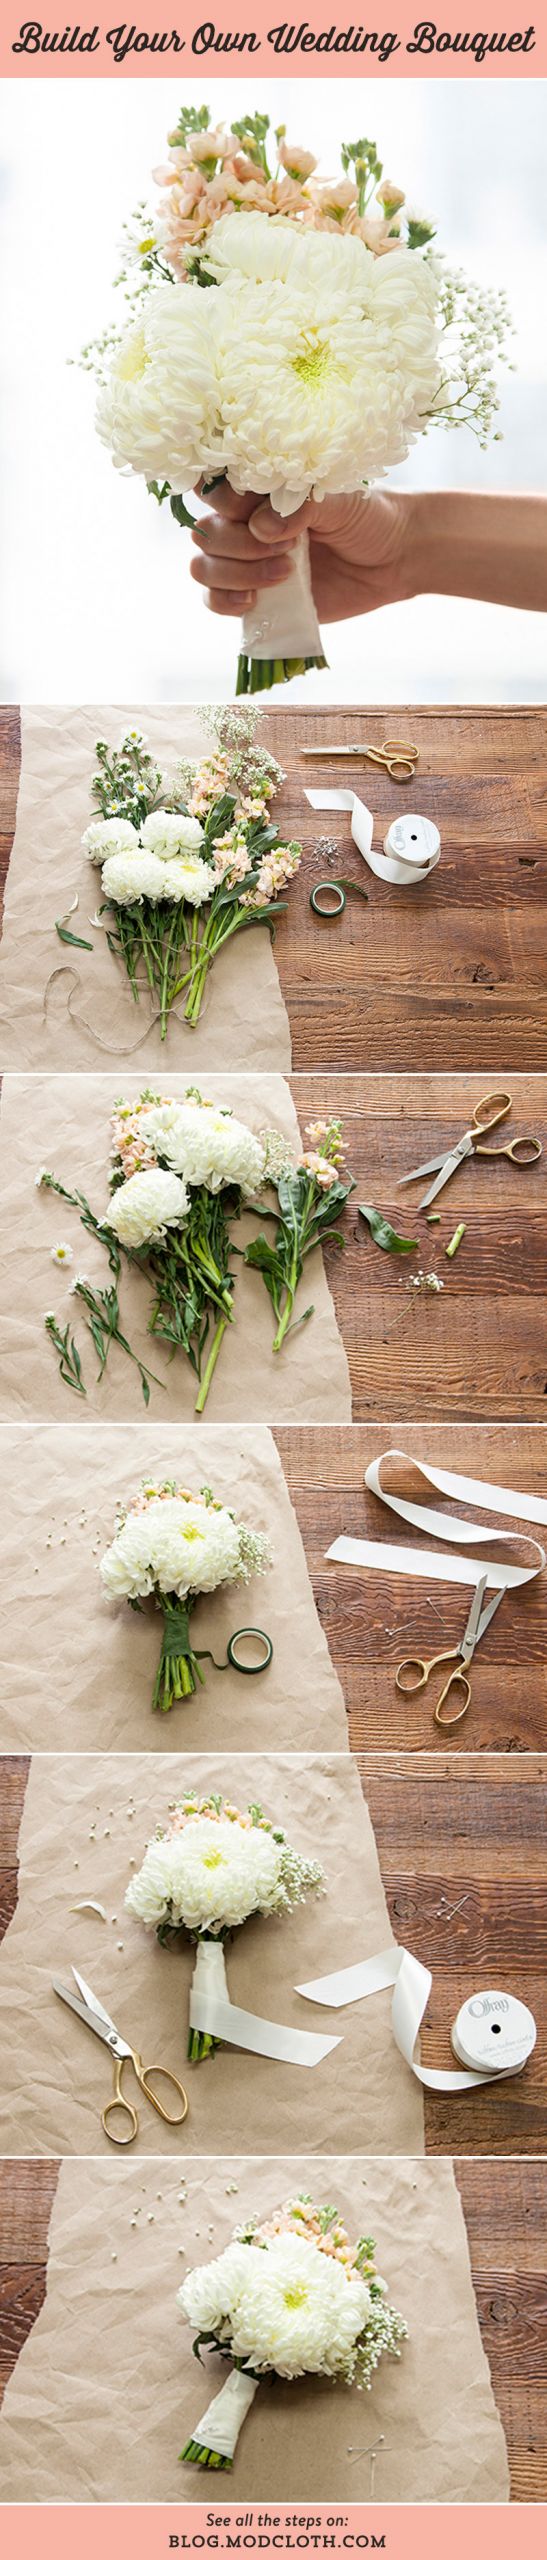 Wedding Flowers DIY
 Build Your Own Wedding Bouquet With This Easy DIY